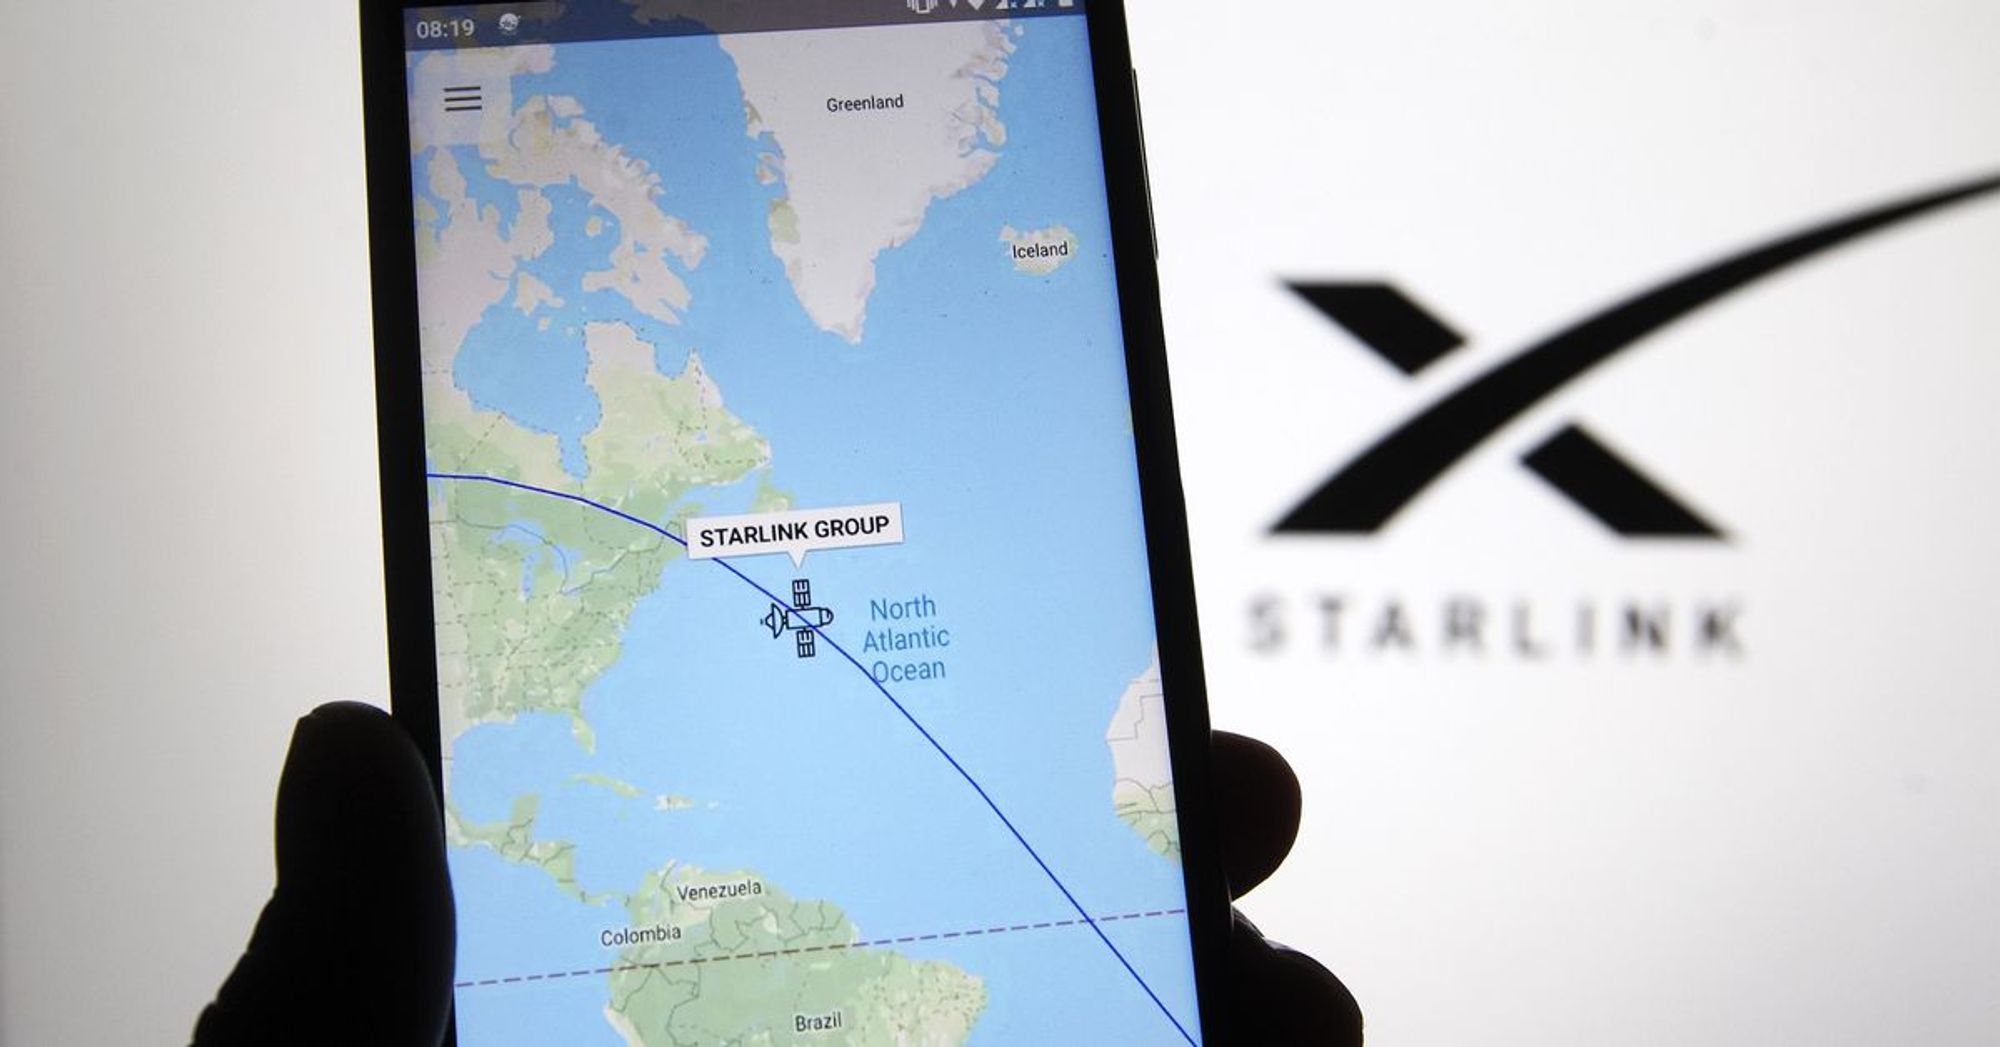 SpaceX's Starlink is in talks with 'several' airlines for in-flight Wi-Fi